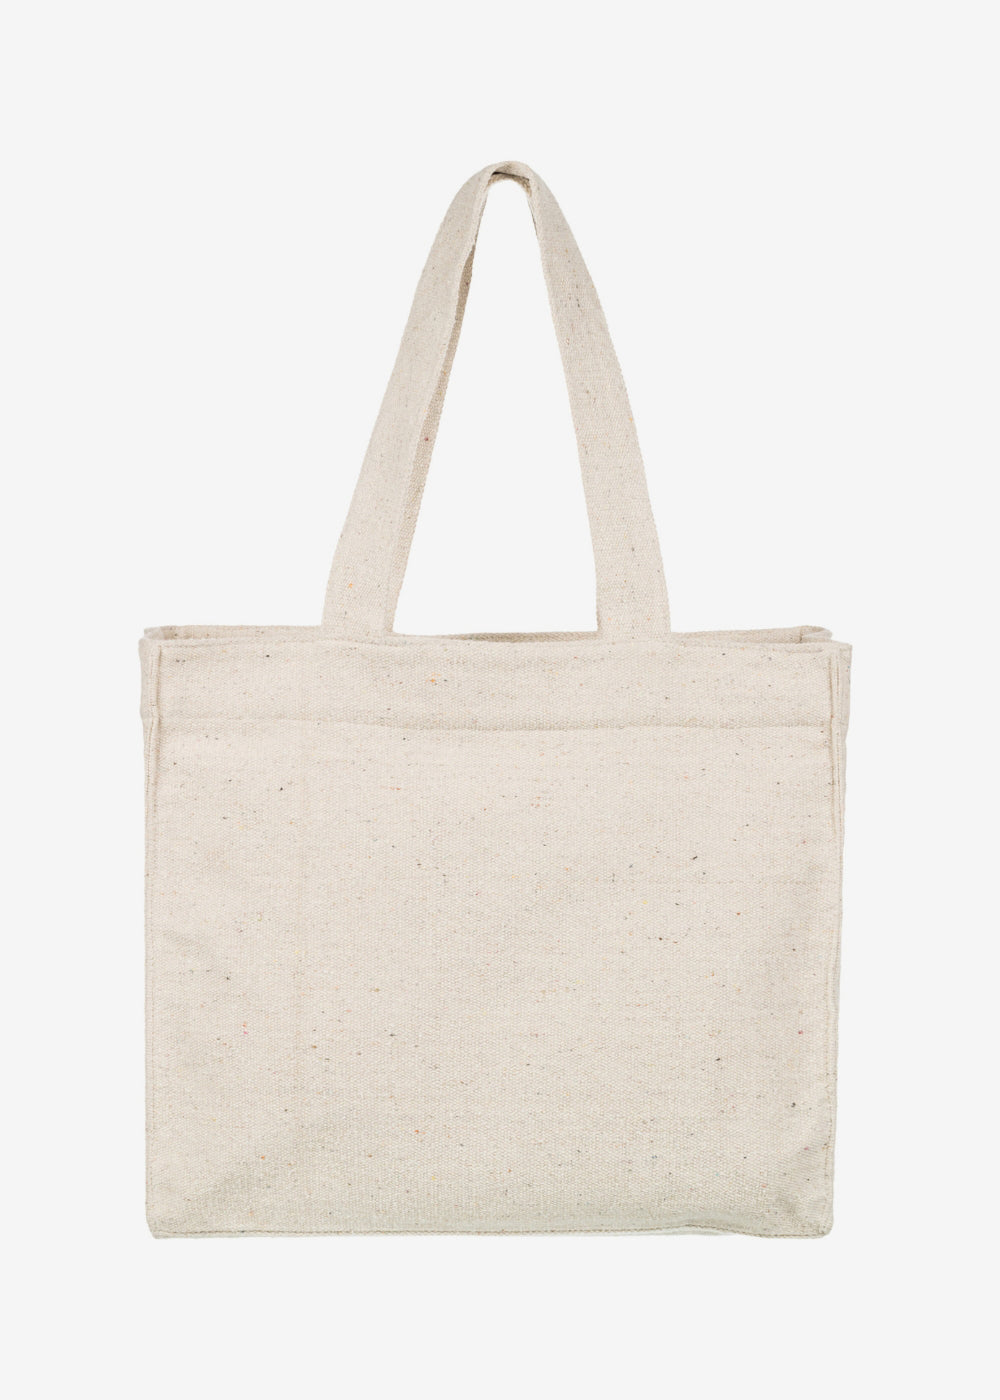 Bags, Totes & Backpacks – The Beach Boutique | A Shop For Ocean Lovers